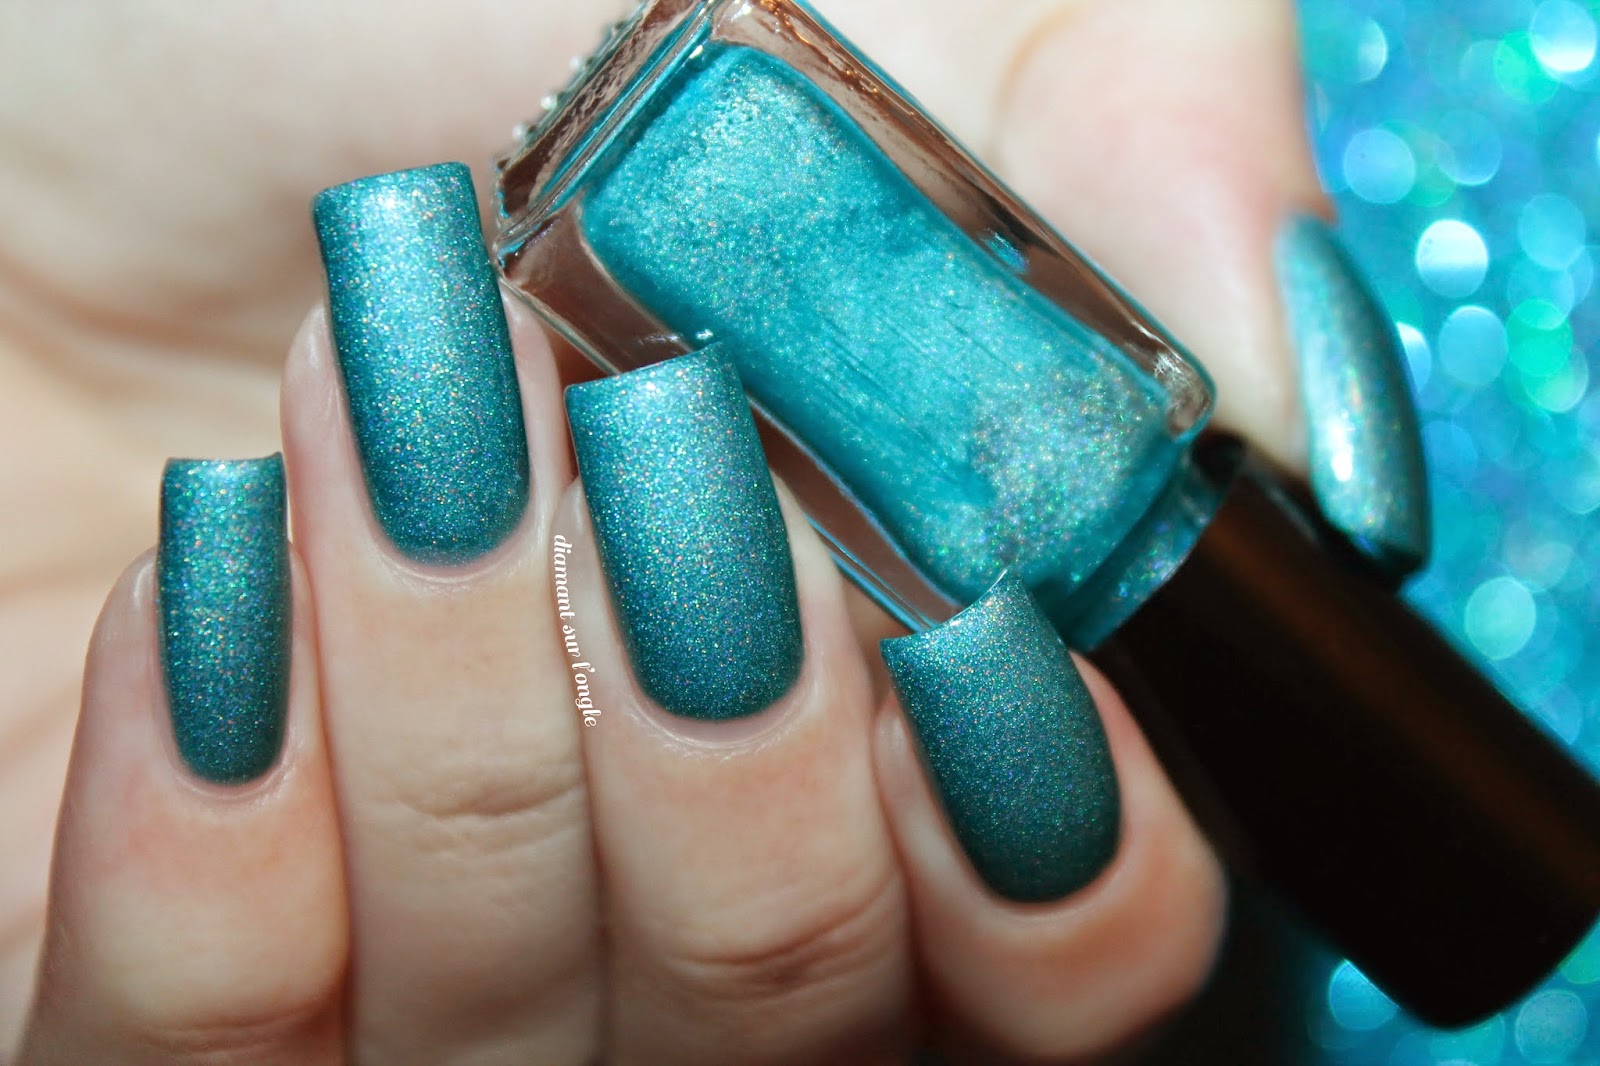 Swatch of a teal holographic franken nail polish